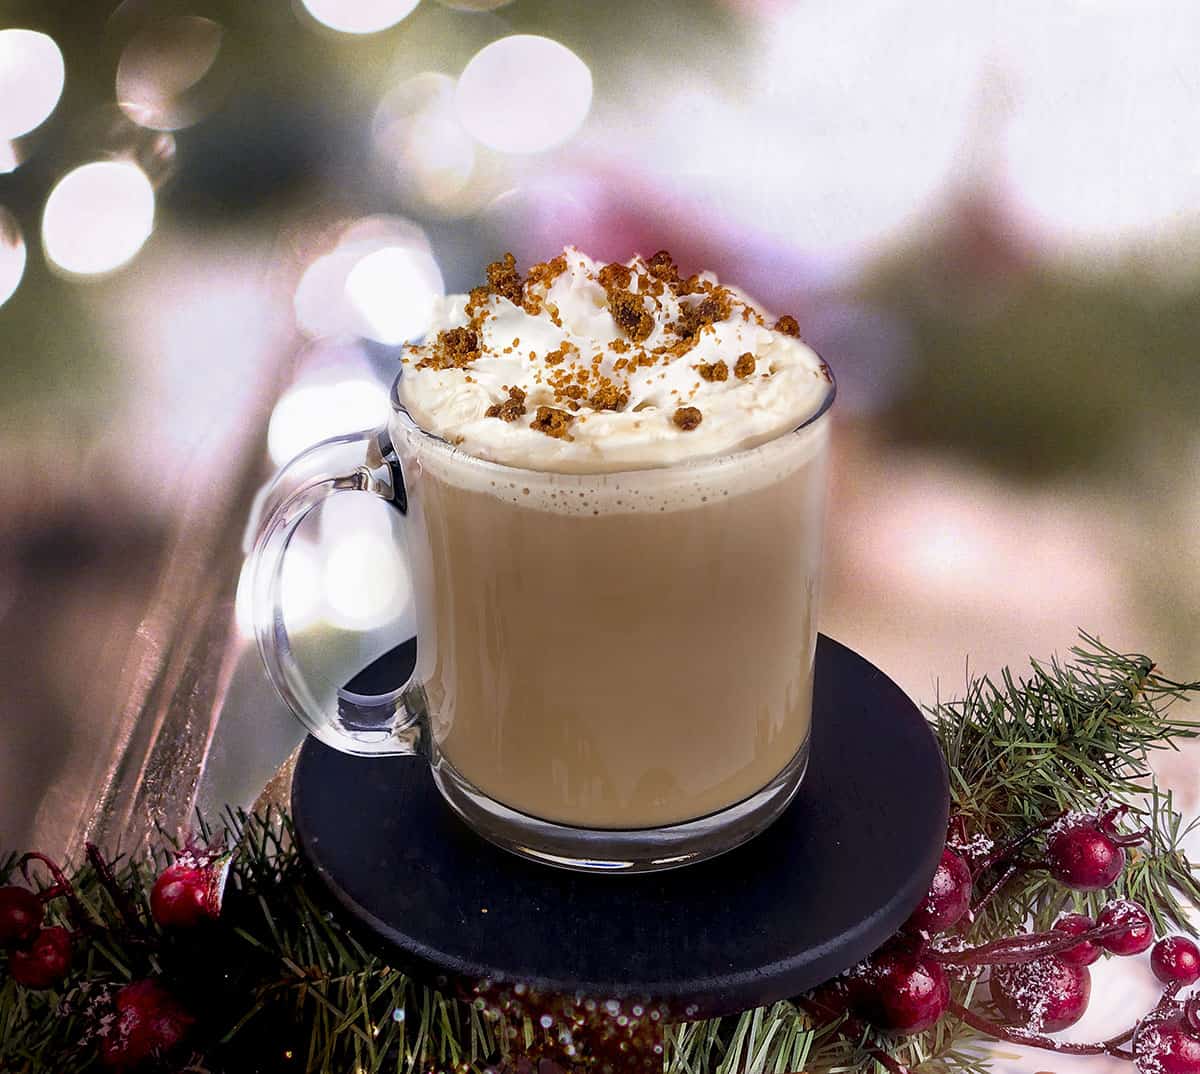 Spiced Rum Hot Chocolate in a glass mug with whipped topping and ginger cookie crumbles on top.